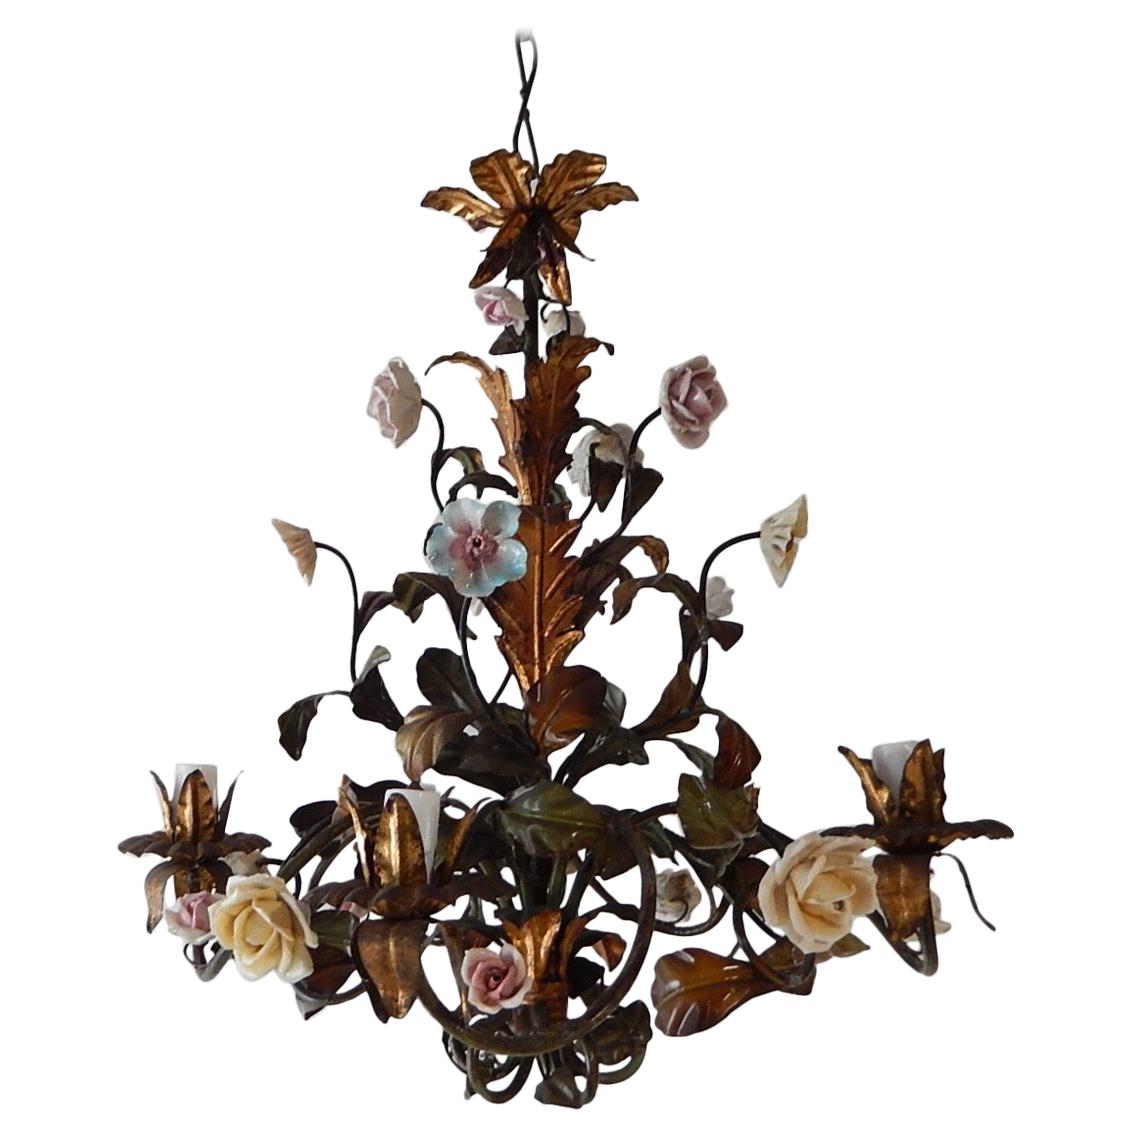 Italian Tole Polychrome Porcelain Roses and Flowers Chandelier, 1870